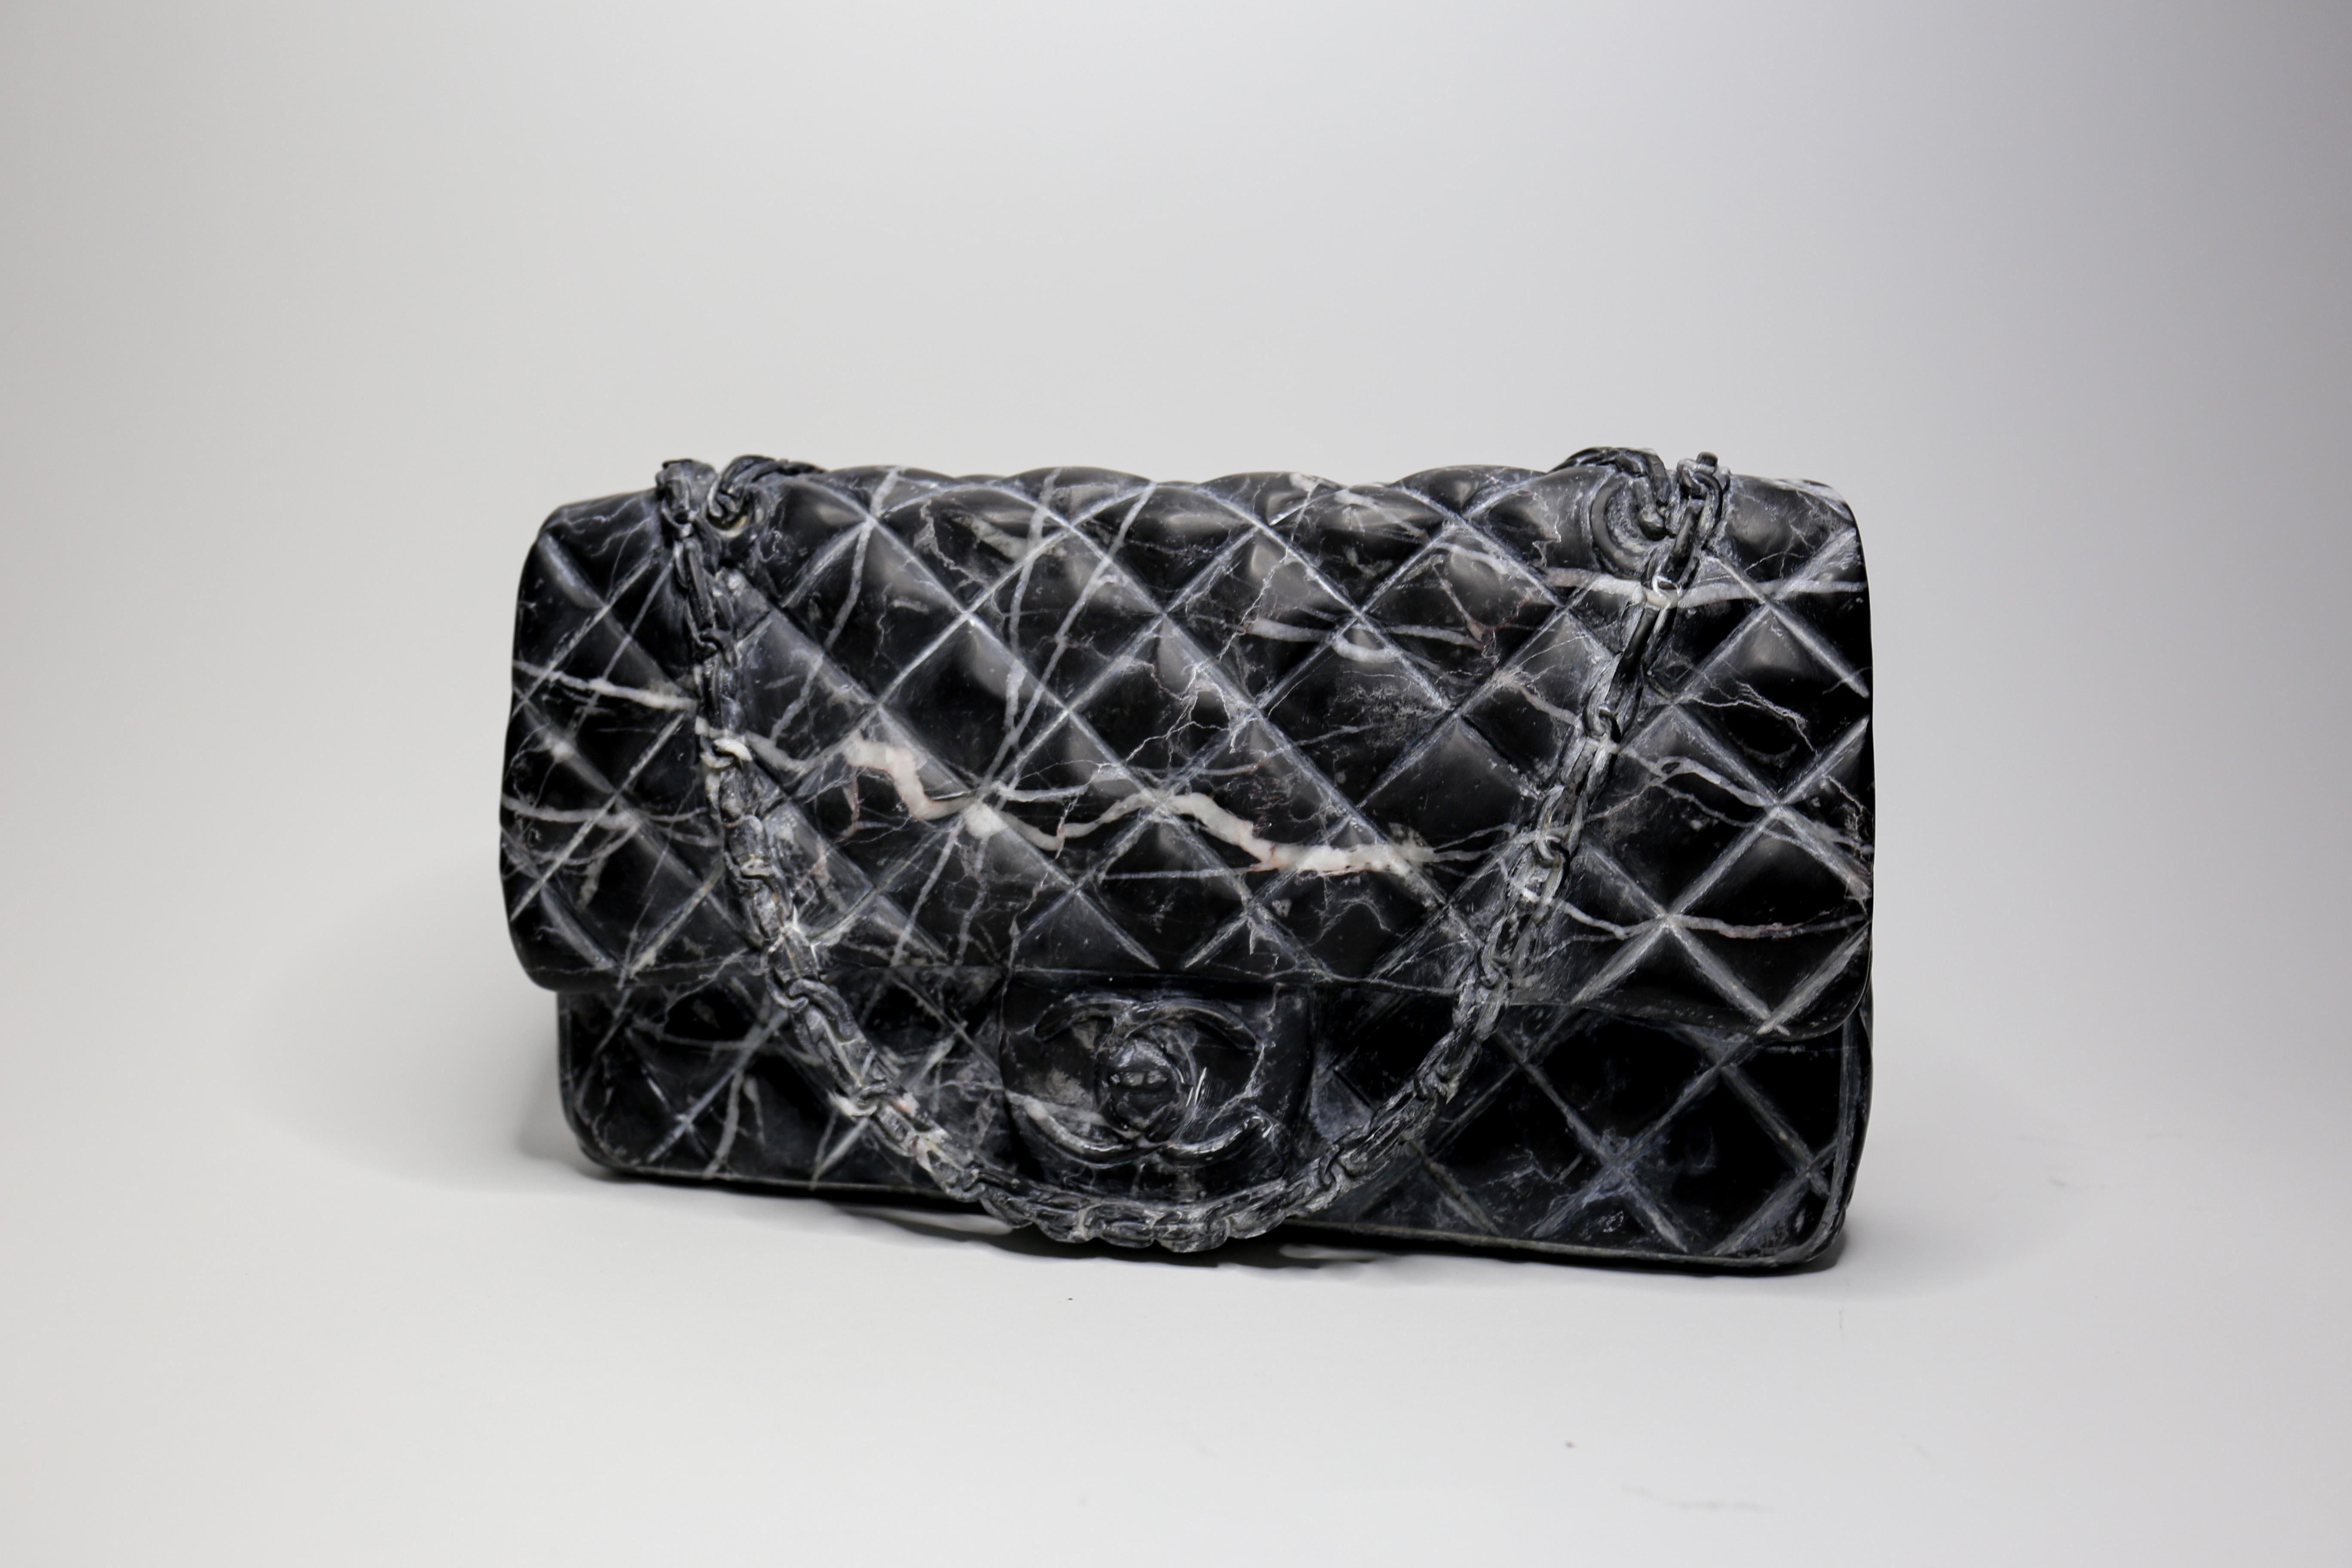 Shop All of Your Ultra-Luxury Gifts in One Place. Handbags